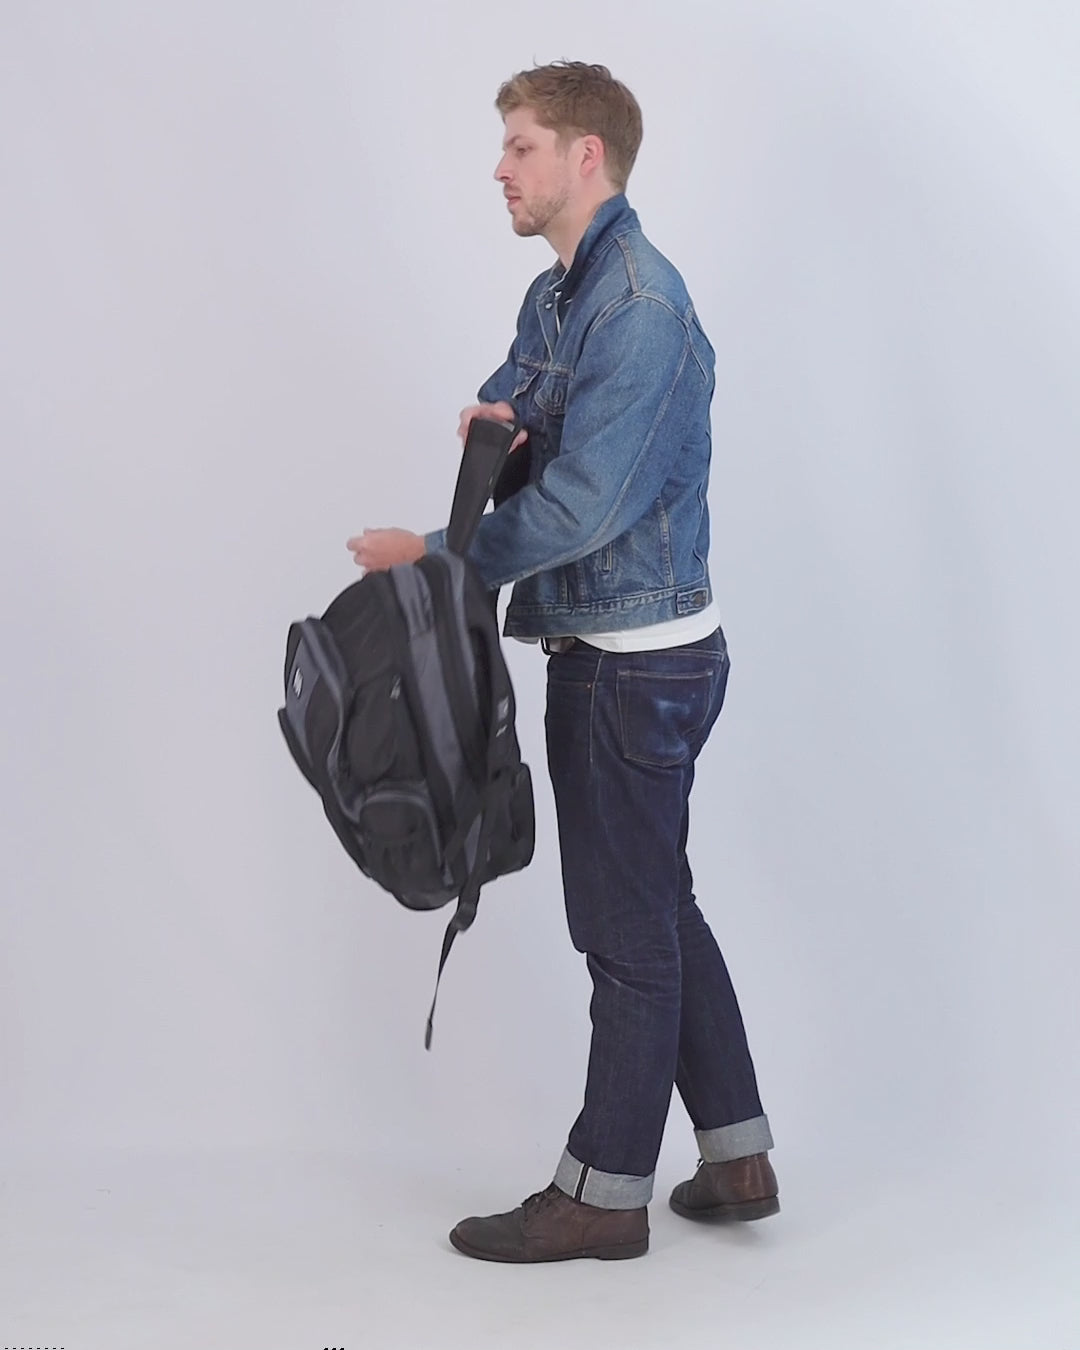 Ful Black Big Easy Backpack for the frequent traveler